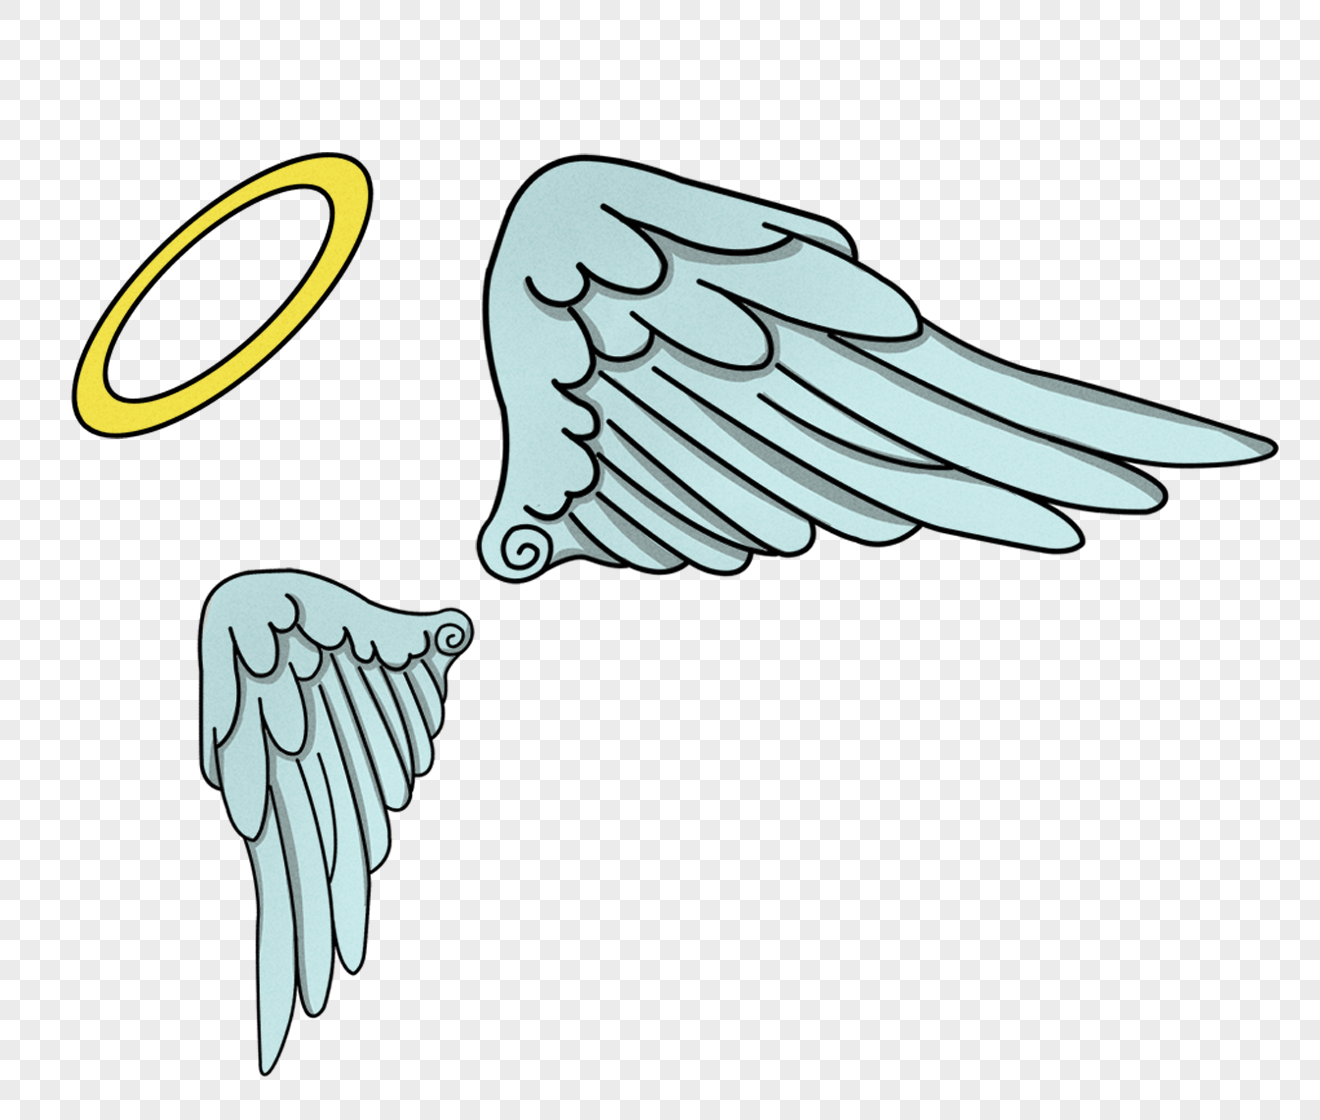 Teal wings and brown halo illustration, Doodle Angel Illustration, Hand  painted angel ring transparent background PNG clipart | HiClipart